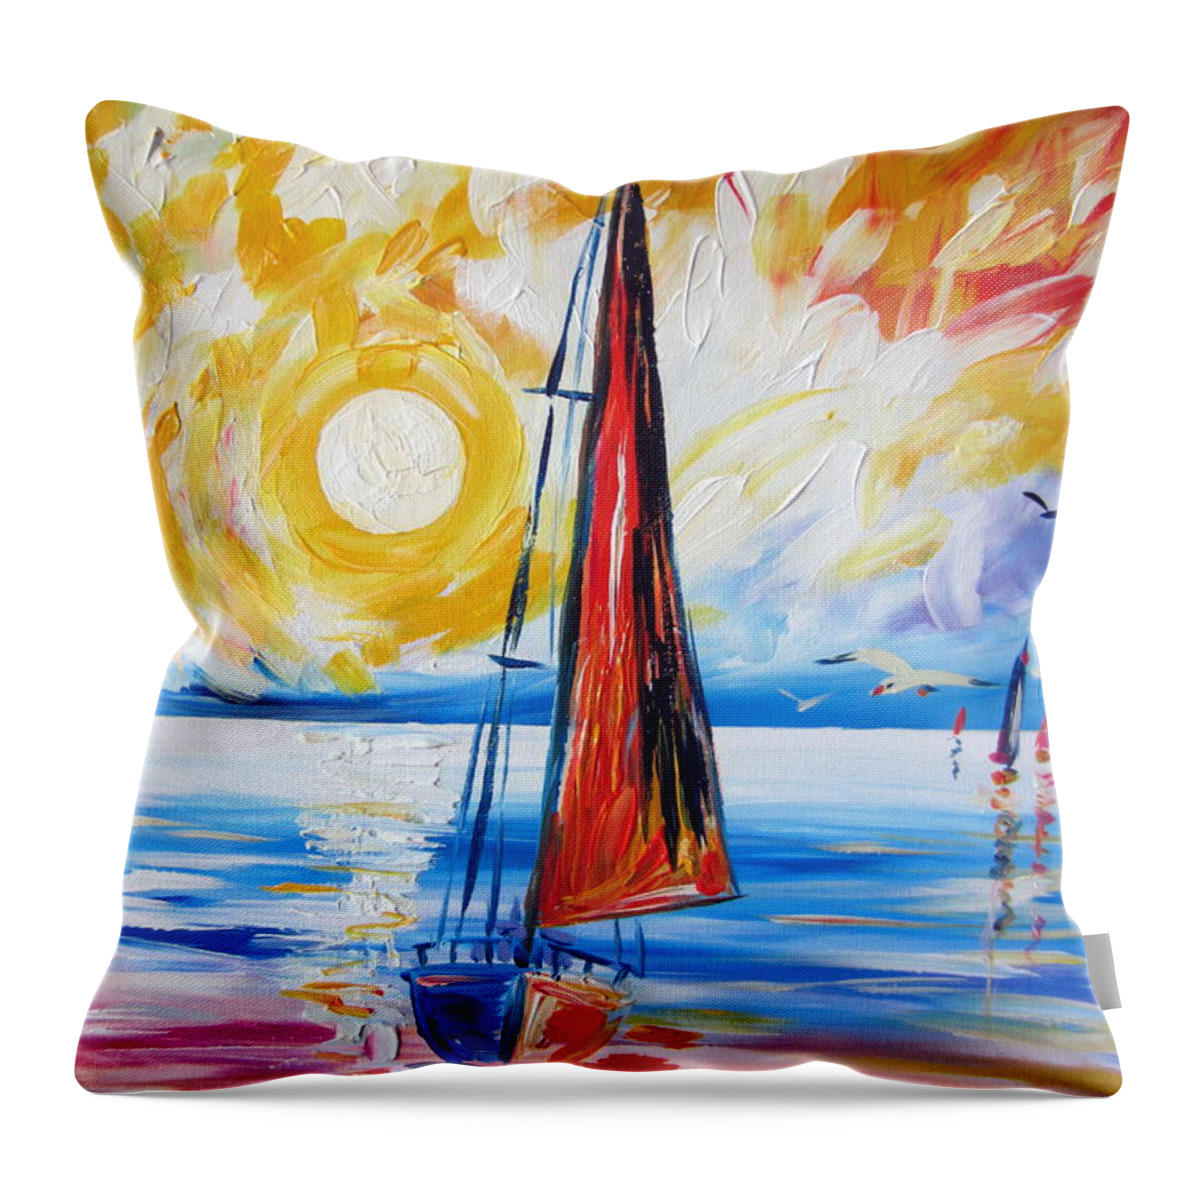 Boats Throw Pillow featuring the painting Sail Sail More by Roberto Gagliardi